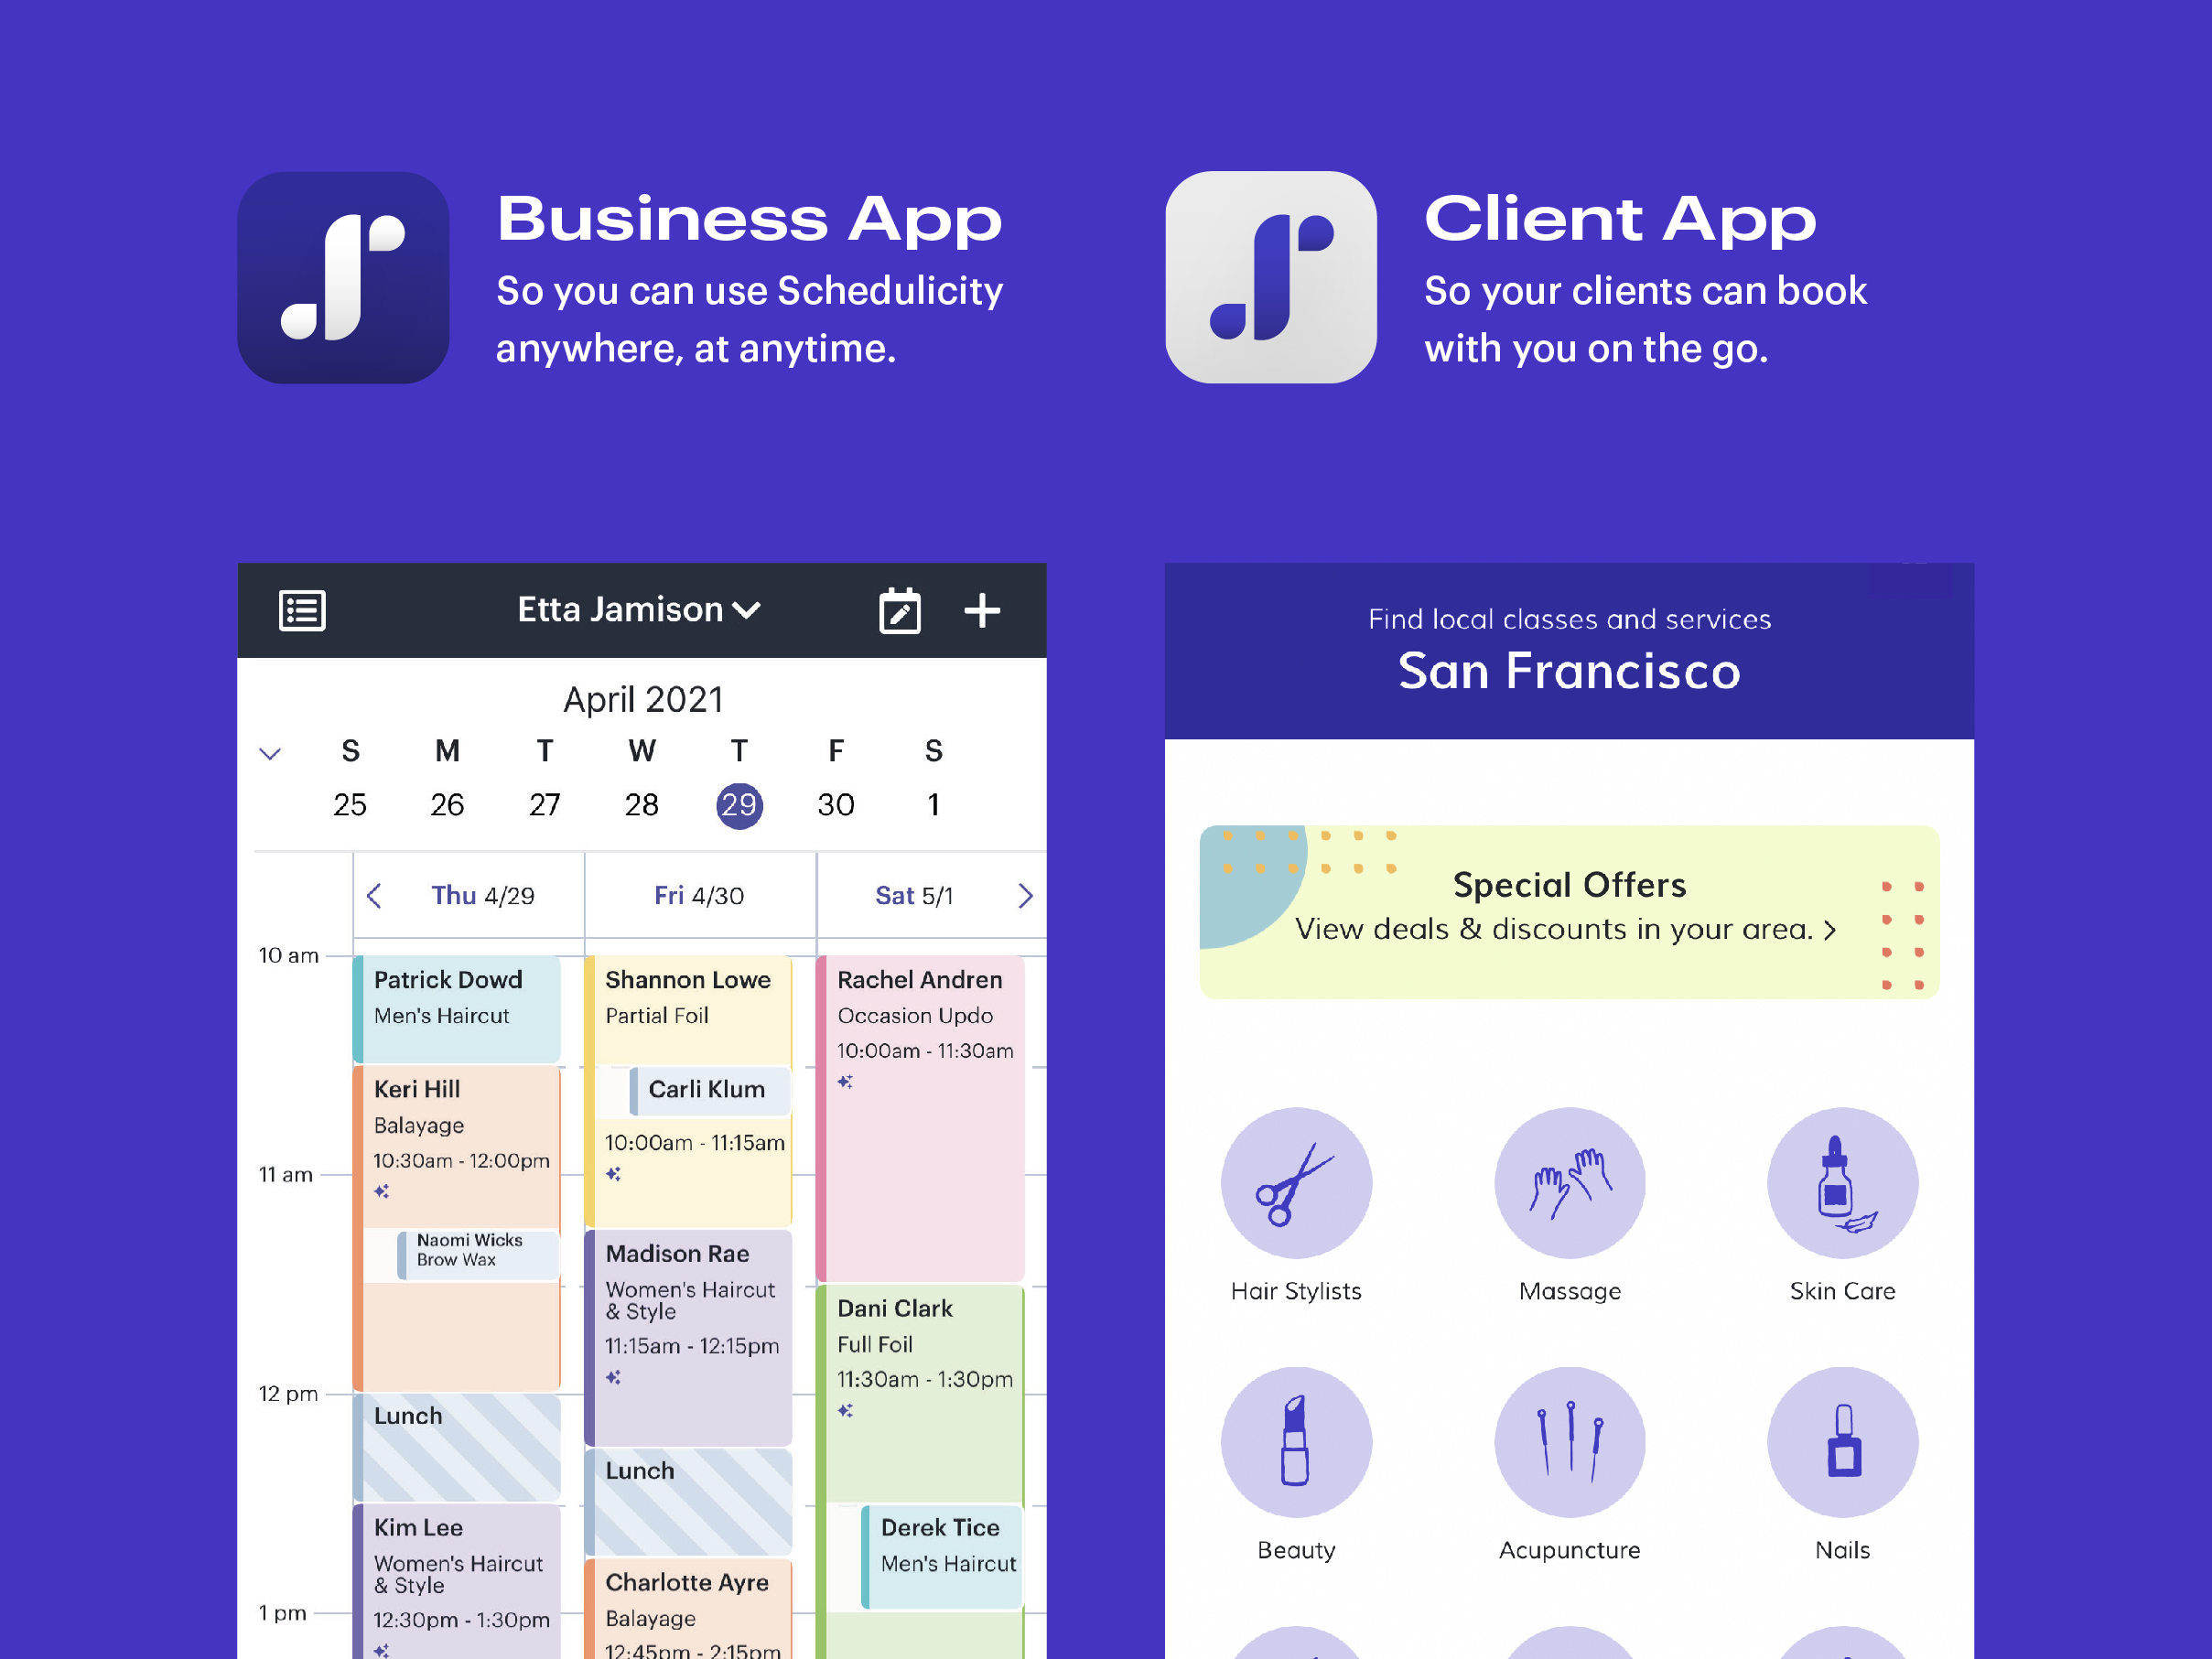 Business App + Client App: So you can use Schedulicity anywhere, at anytime and your clients can book with you on the go.